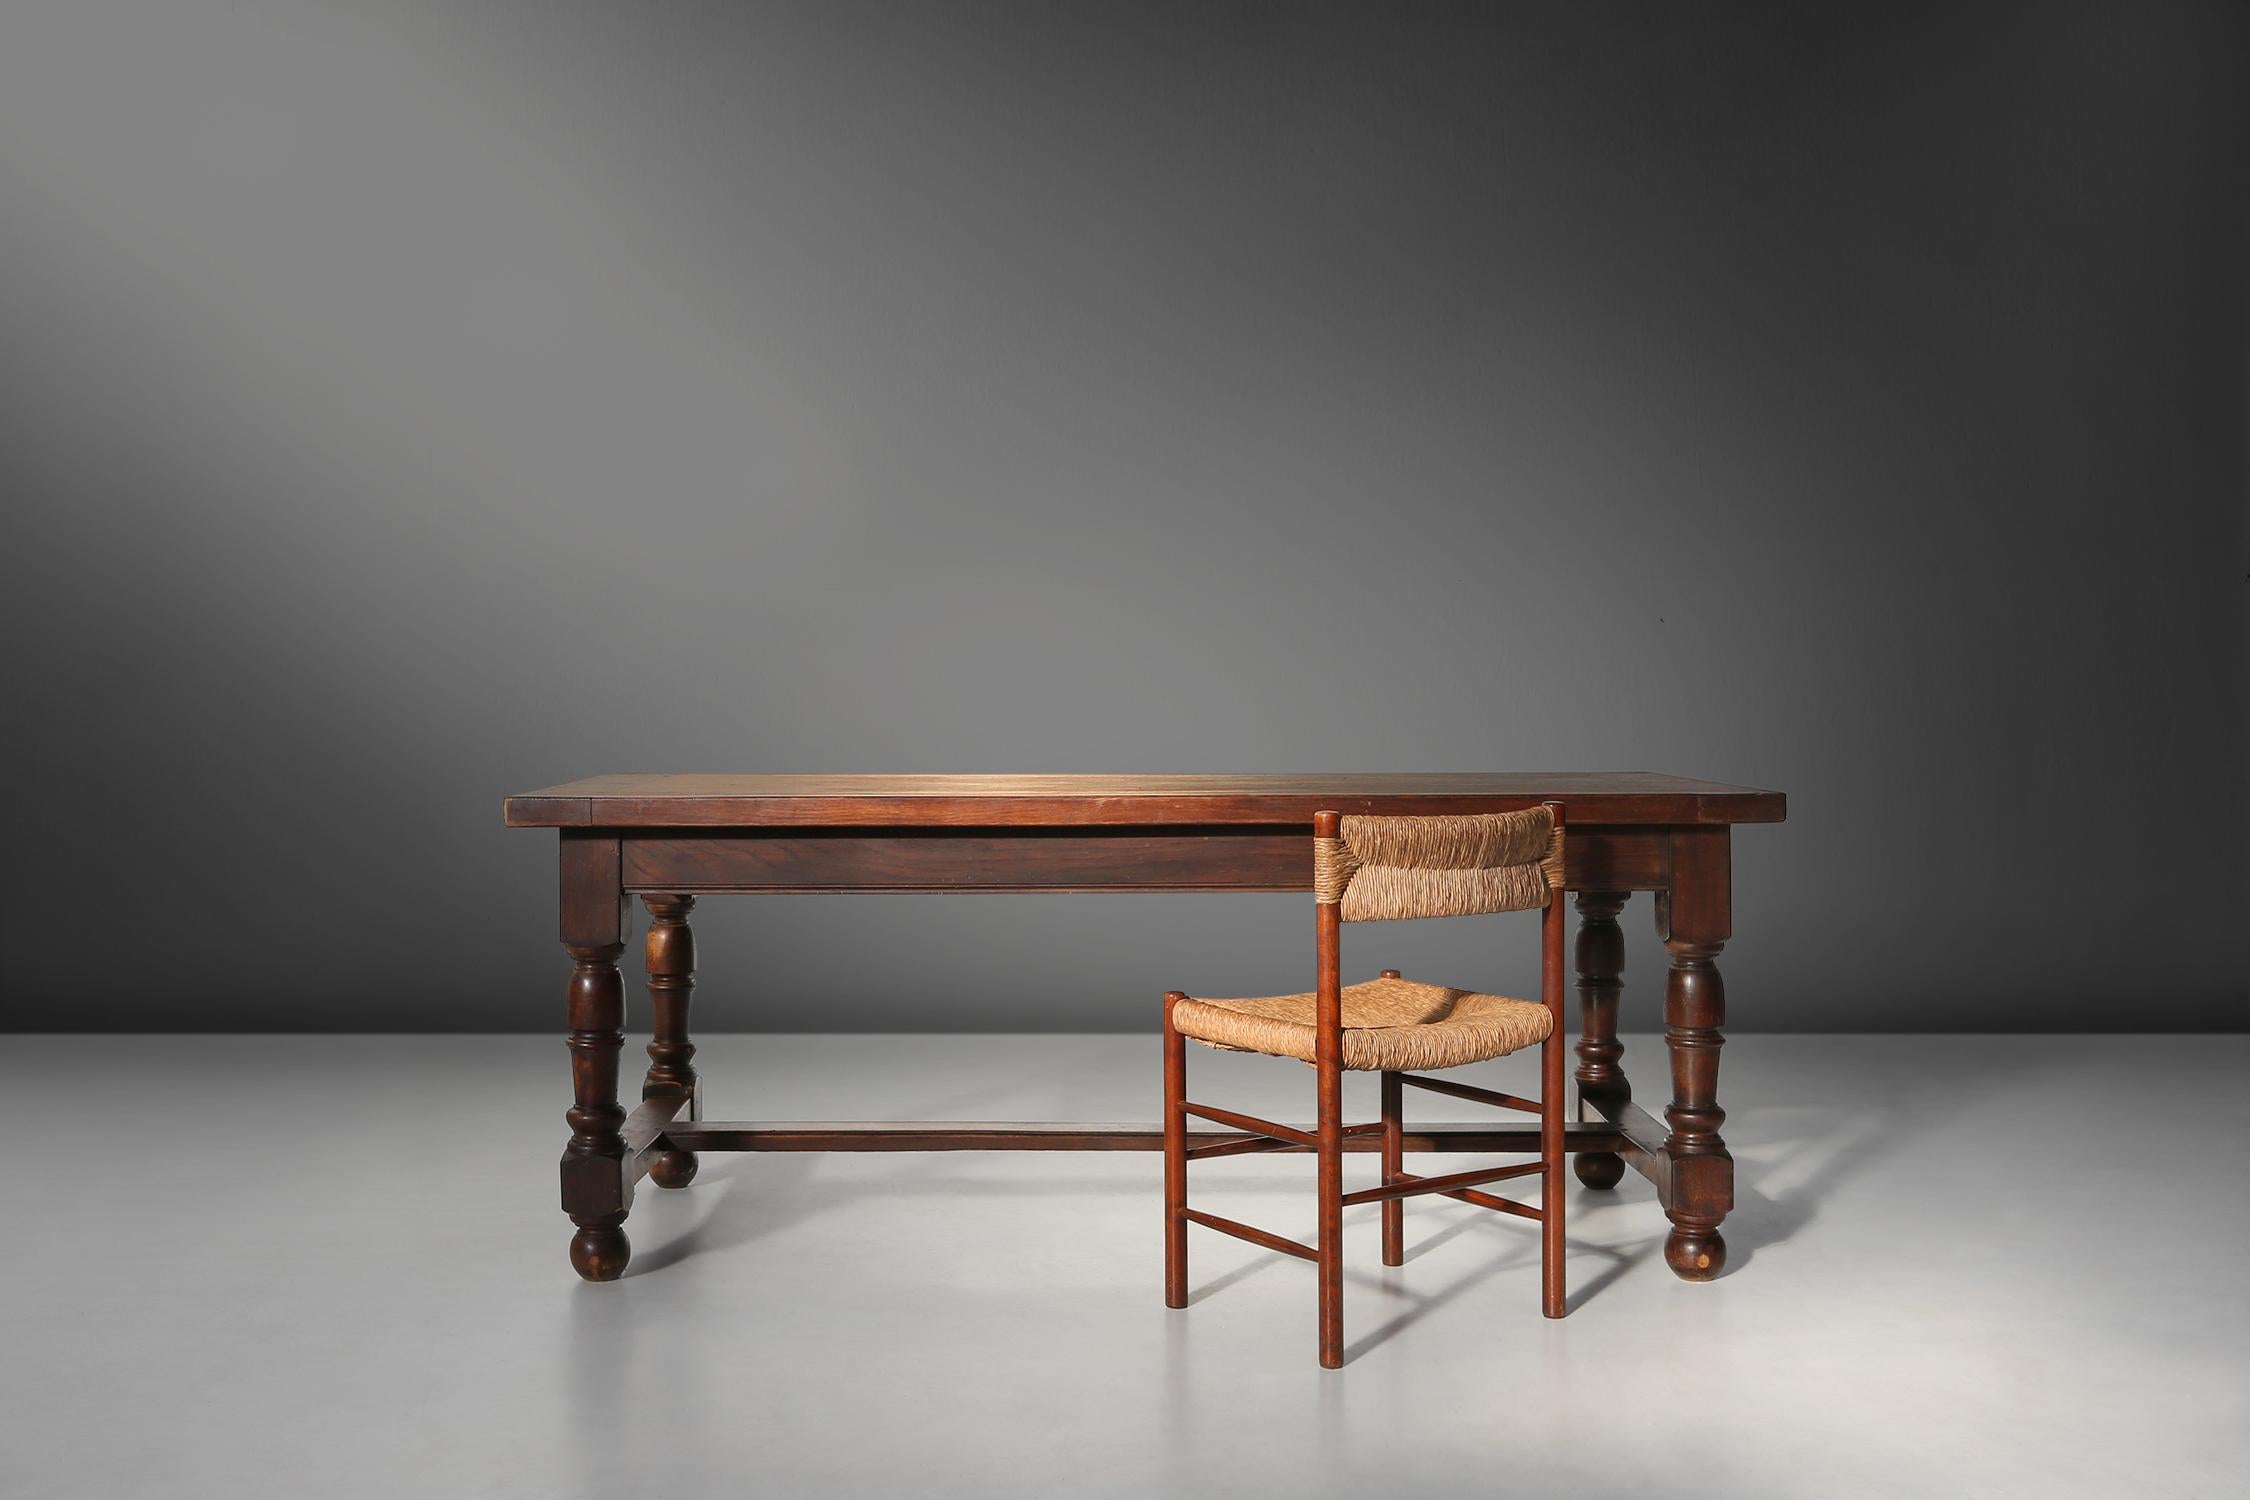 This 20th century rustic dining table is made of solid oak and has two drawers on each side, where you can store your cutlery, napkins or other items.

The table has round twisted legs and a crossbar connecting them, creating a sturdy and elegant